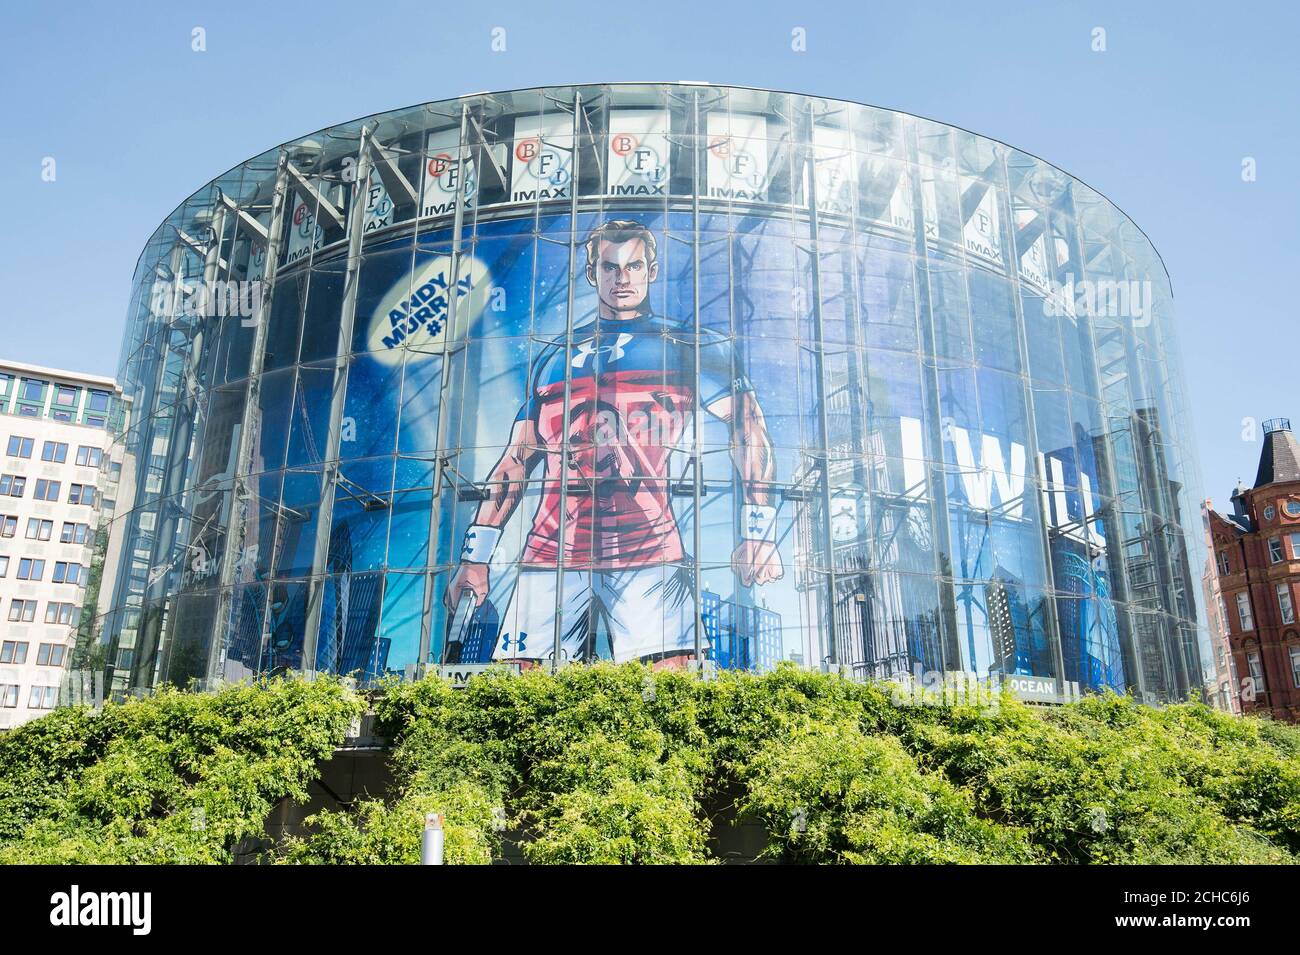 A superhero inspired illustration of Andy Murray, created by artist David Boller, is unveiled by clothing brand Under Armour at the IMAX cinema in Waterloo, London. Stock Photo